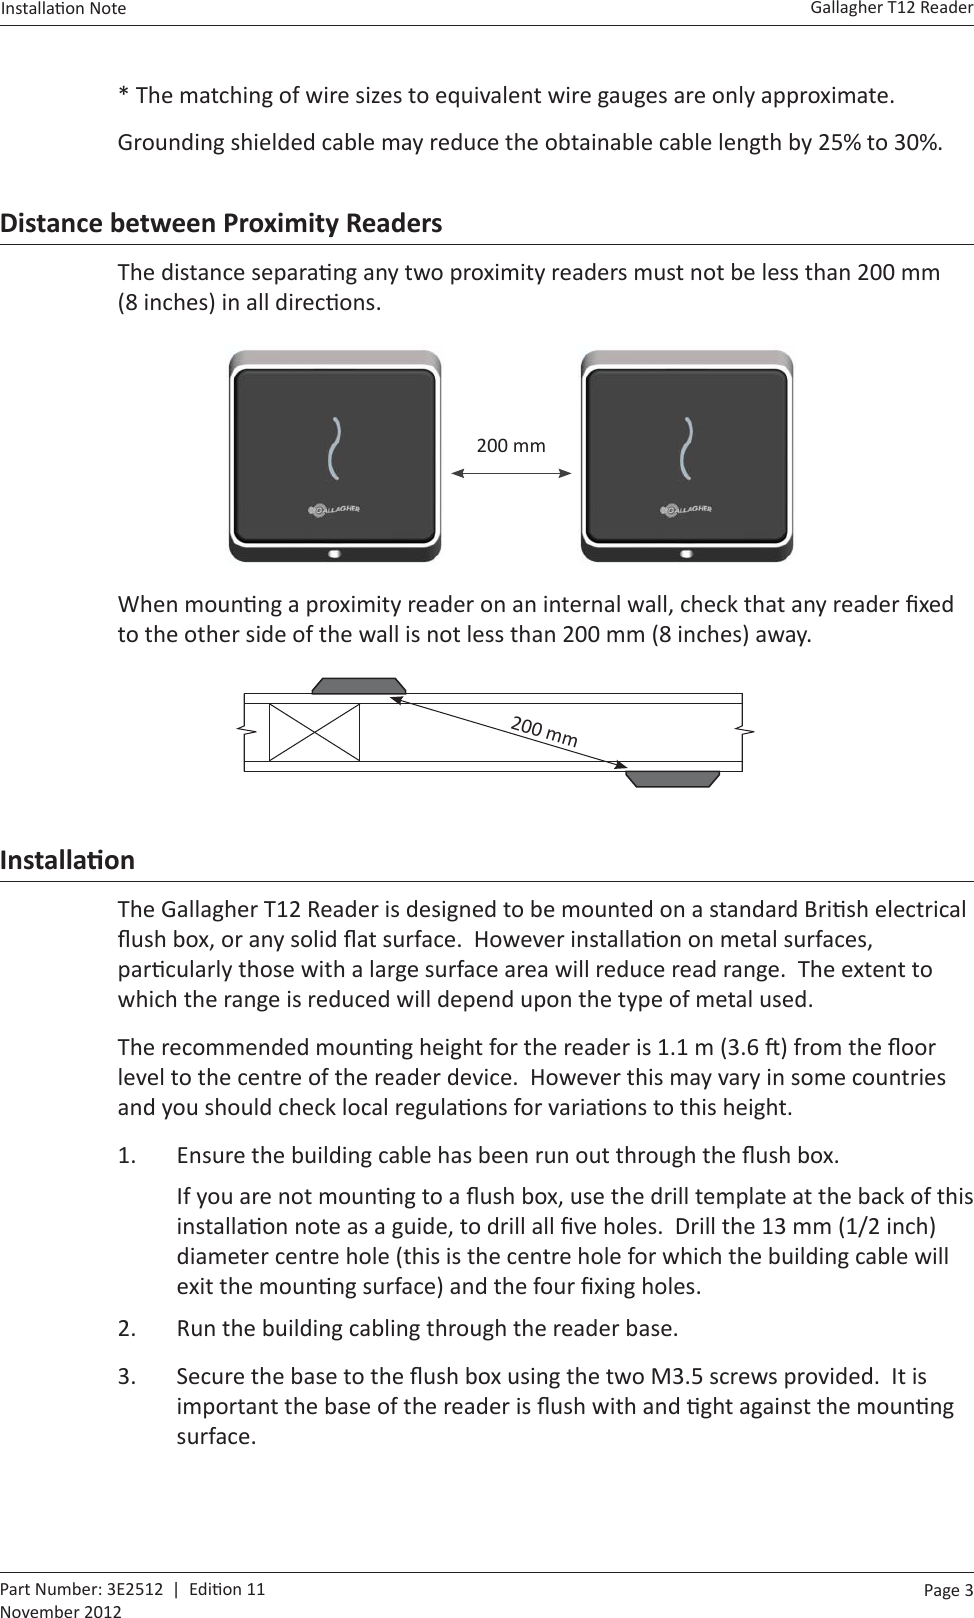 Page  3   Gallagher T12 ReaderInstalla on Note  Part Number: 3E2512  |  Edi on 11November 2012* The matching of wire sizes to equivalent wire gauges are only approximate.Grounding shielded cable may reduce the obtainable cable length by 25% to 30%.Distance between Proximity ReadersThe distance separa ng any two proximity readers must not be less than 200 mm (8 inches) in all direc ons.  200 mmWhen moun ng a proximity reader on an internal wall, check that any reader ﬁ xed to the other side of the wall is not less than 200 mm (8 inches) away.        200 mmInstallaƟ onThe Gallagher T12 Reader is designed to be mounted on a standard Bri sh electrical ﬂ ush box, or any solid ﬂ at surface.  However installa on on metal surfaces, par cularly those with a large surface area will reduce read range.  The extent to which the range is reduced will depend upon the type of metal used.The recommended moun ng height for the reader is 1.1 m (3.6  ) from the ﬂ oor level to the centre of the reader device.  However this may vary in some countries and you should check local regula ons for varia ons to this height.1.  Ensure the building cable has been run out through the ﬂ ush box.If you are not moun ng to a ﬂ ush box, use the drill template at the back of this installa on note as a guide, to drill all ﬁ ve holes.  Drill the 13 mm (1/2 inch) diameter centre hole (this is the centre hole for which the building cable will exit the moun ng surface) and the four ﬁ xing holes.2.  Run the building cabling through the reader base.3.  Secure the base to the ﬂ ush box using the two M3.5 screws provided.  It is important the base of the reader is ﬂ ush with and  ght against the moun ng surface.